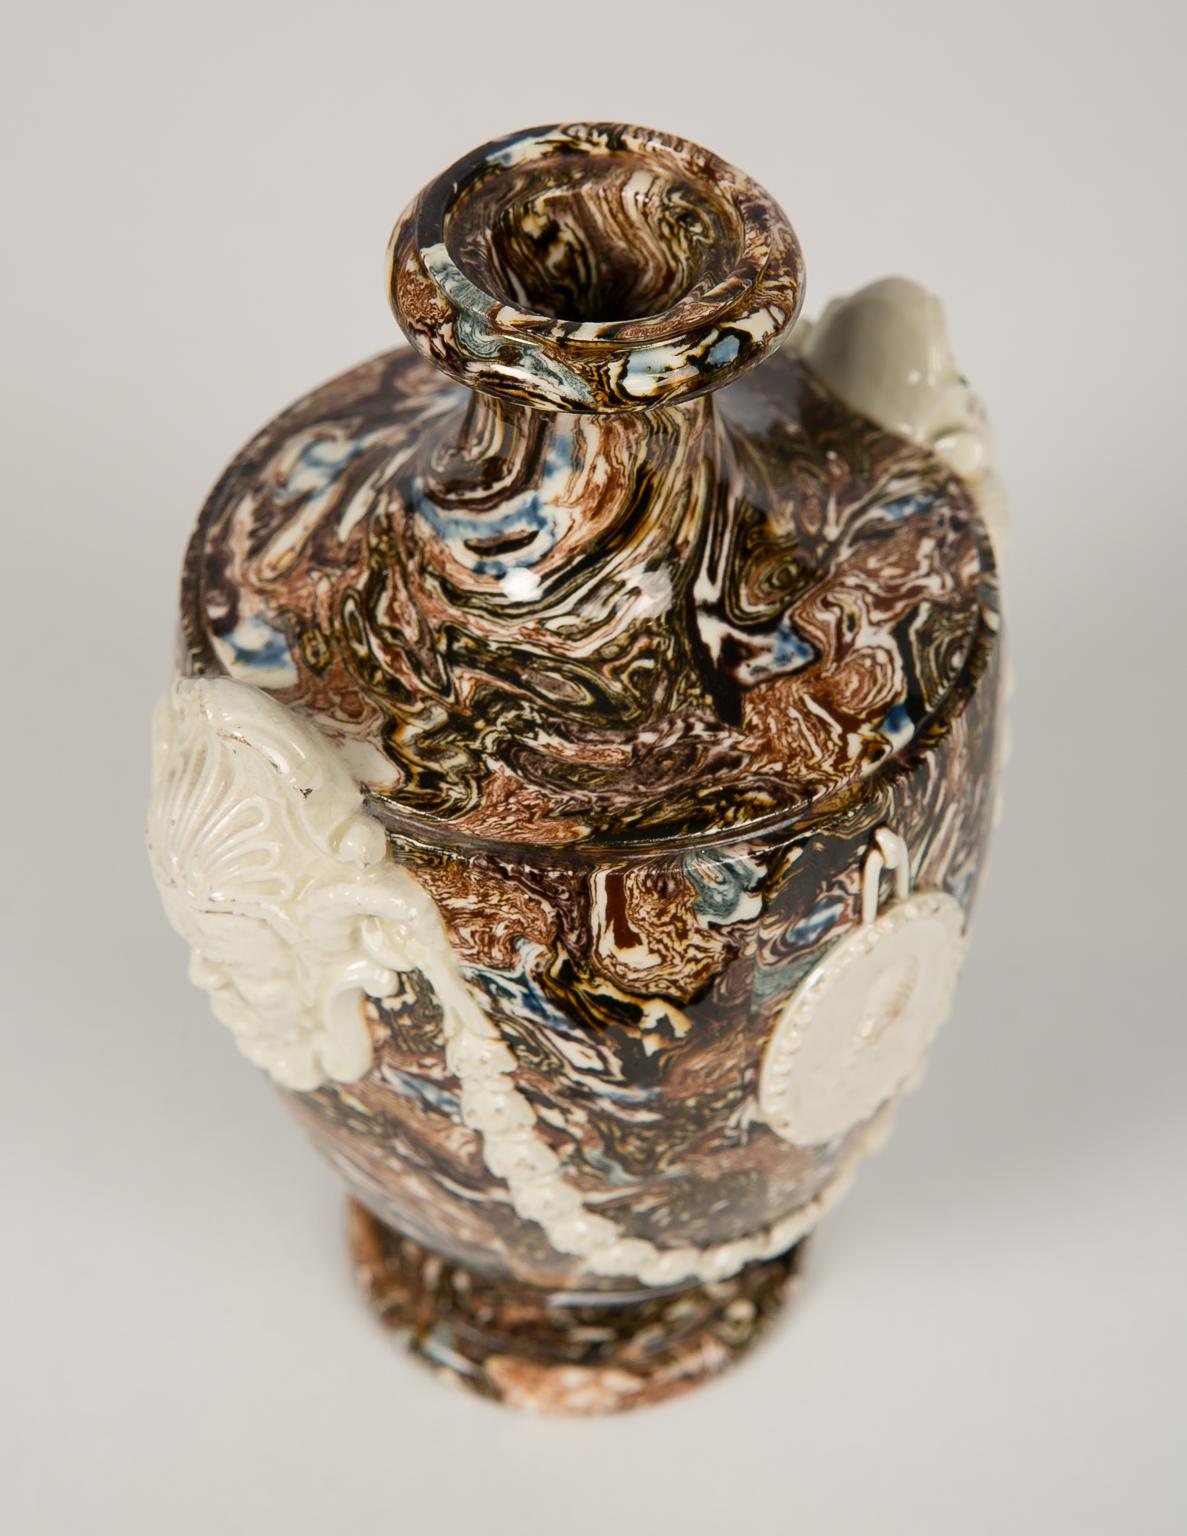 Earthenware Solid Agateware Vase 18th Century Made by Neale & Co.